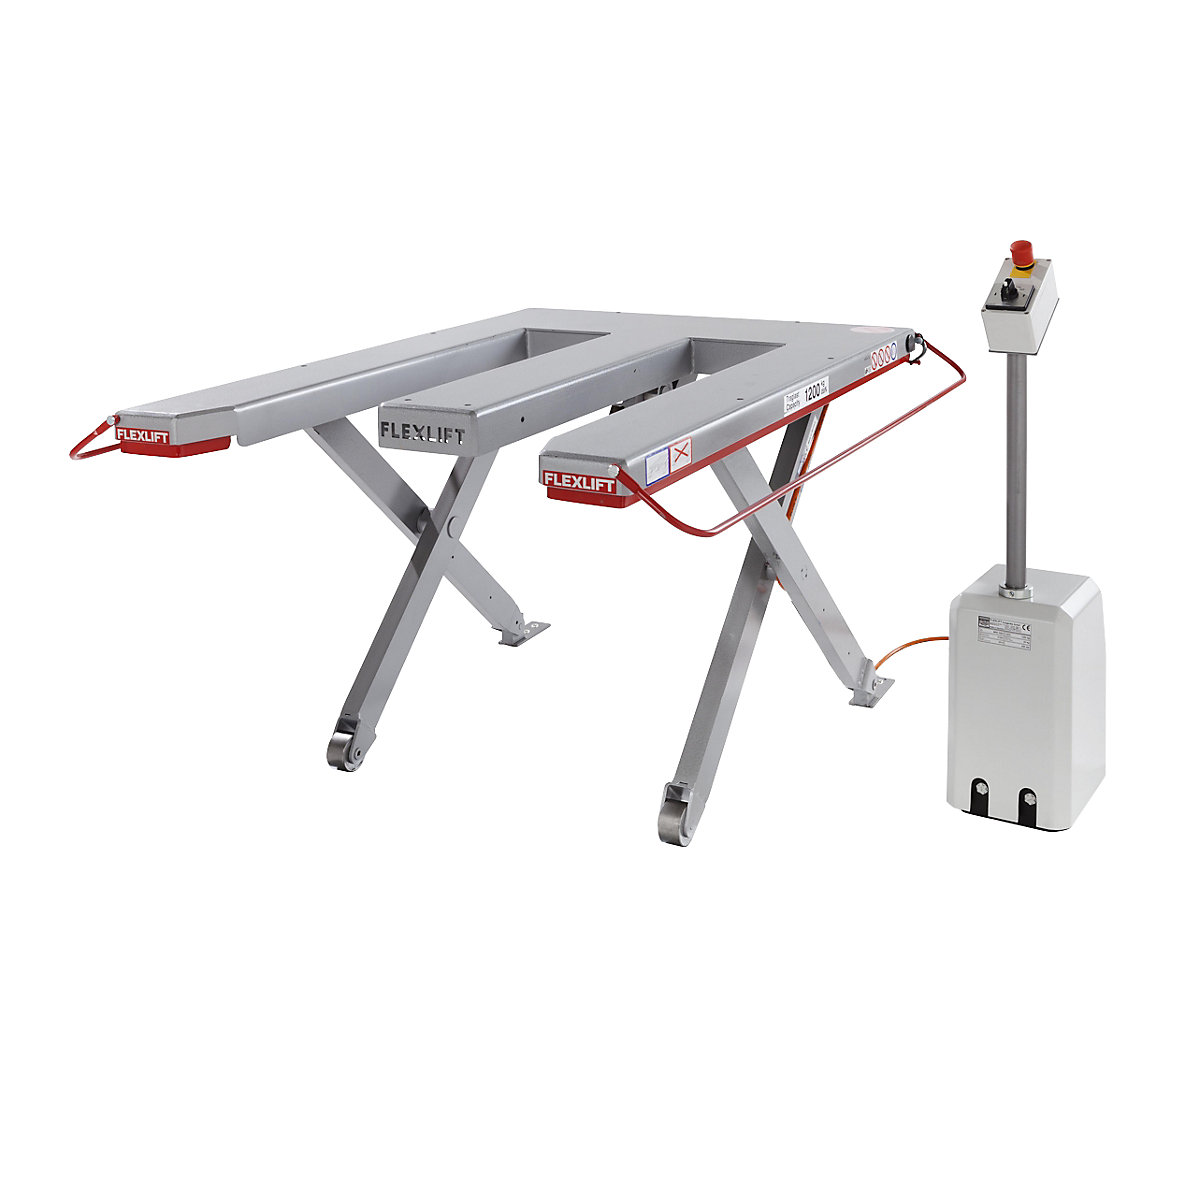 Low profile lift table, E series – Flexlift, max. load 1200 kg, LxW 1300 x 910 mm, 400 V 3-phase